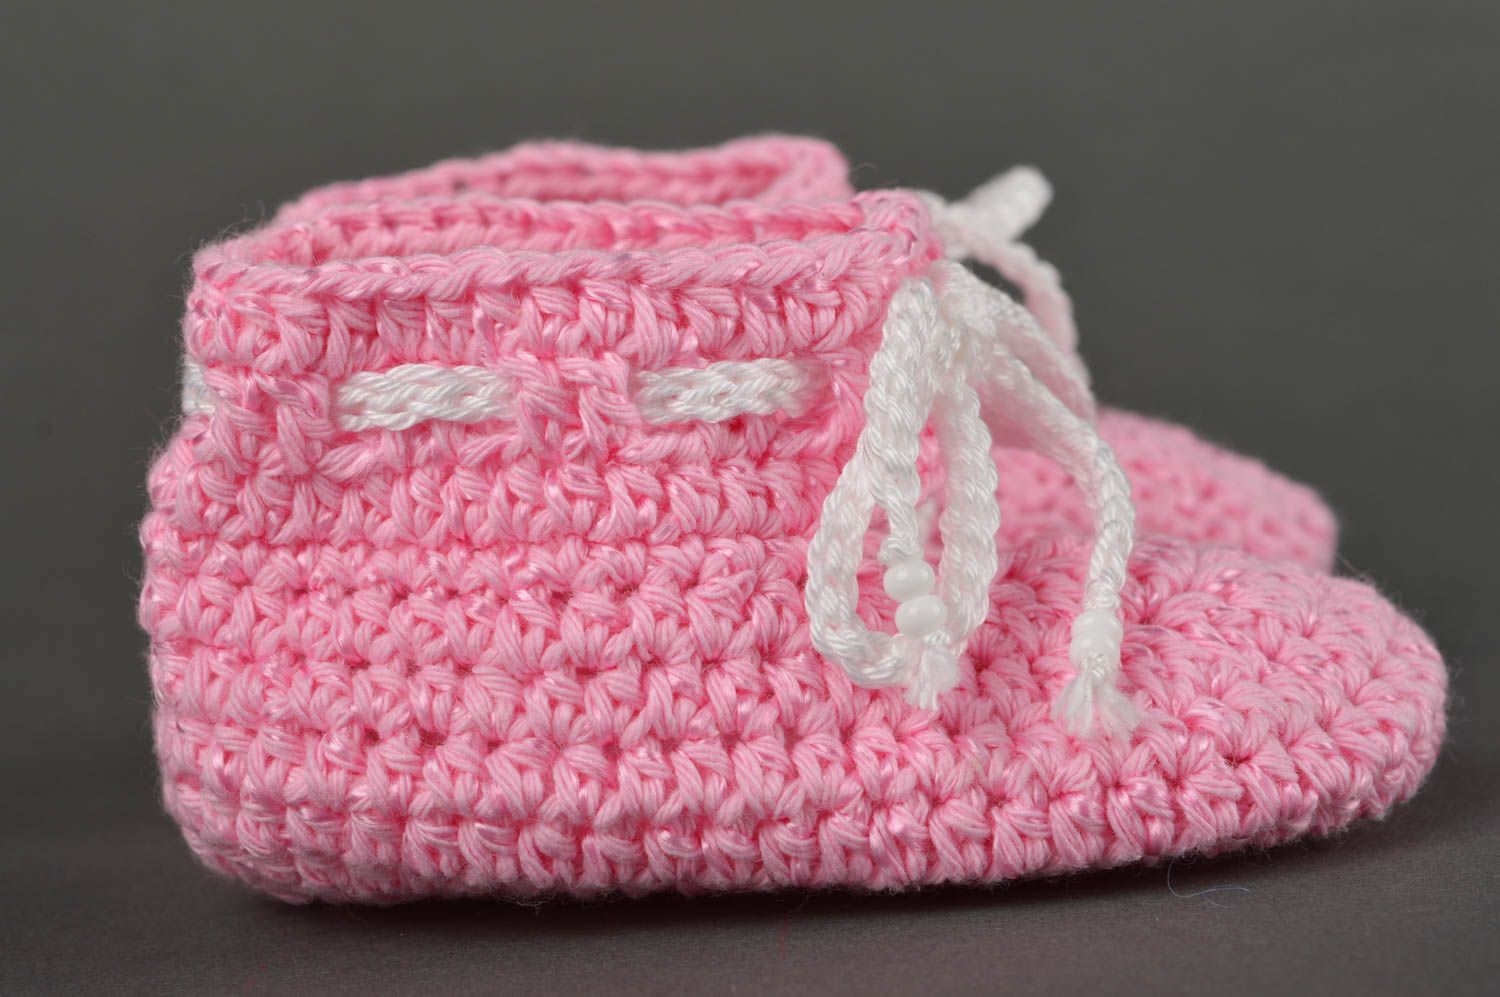 Handmade crocheted baby bootees unusual shoes for newborns stylish shoes photo 3